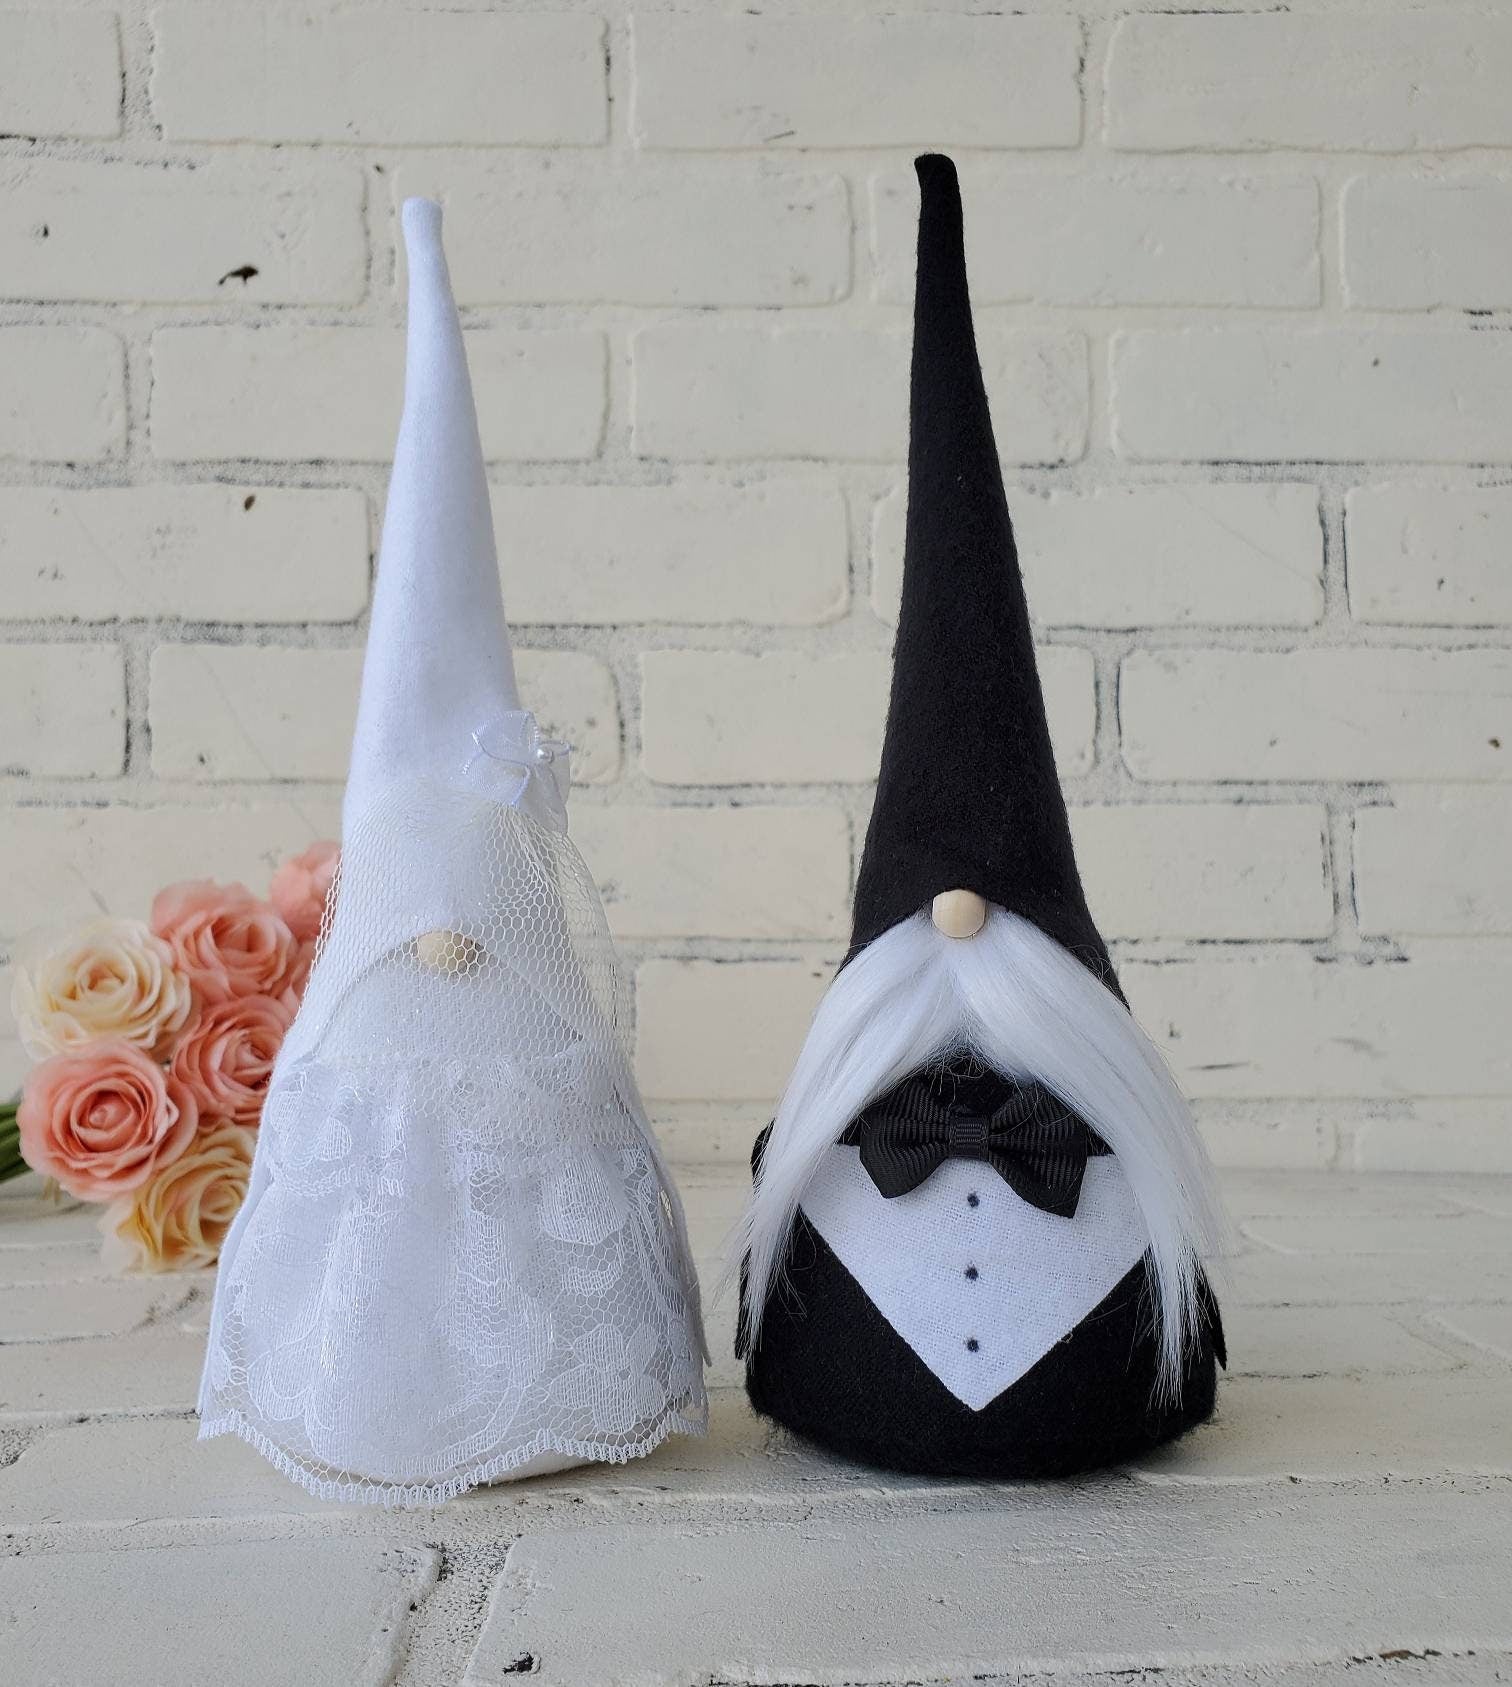 Bride and Groom Gnome set complete with groom in tux & tie. Bride is fully adorned in lace dress and veil. With pink & cream rose bouquet accented in background